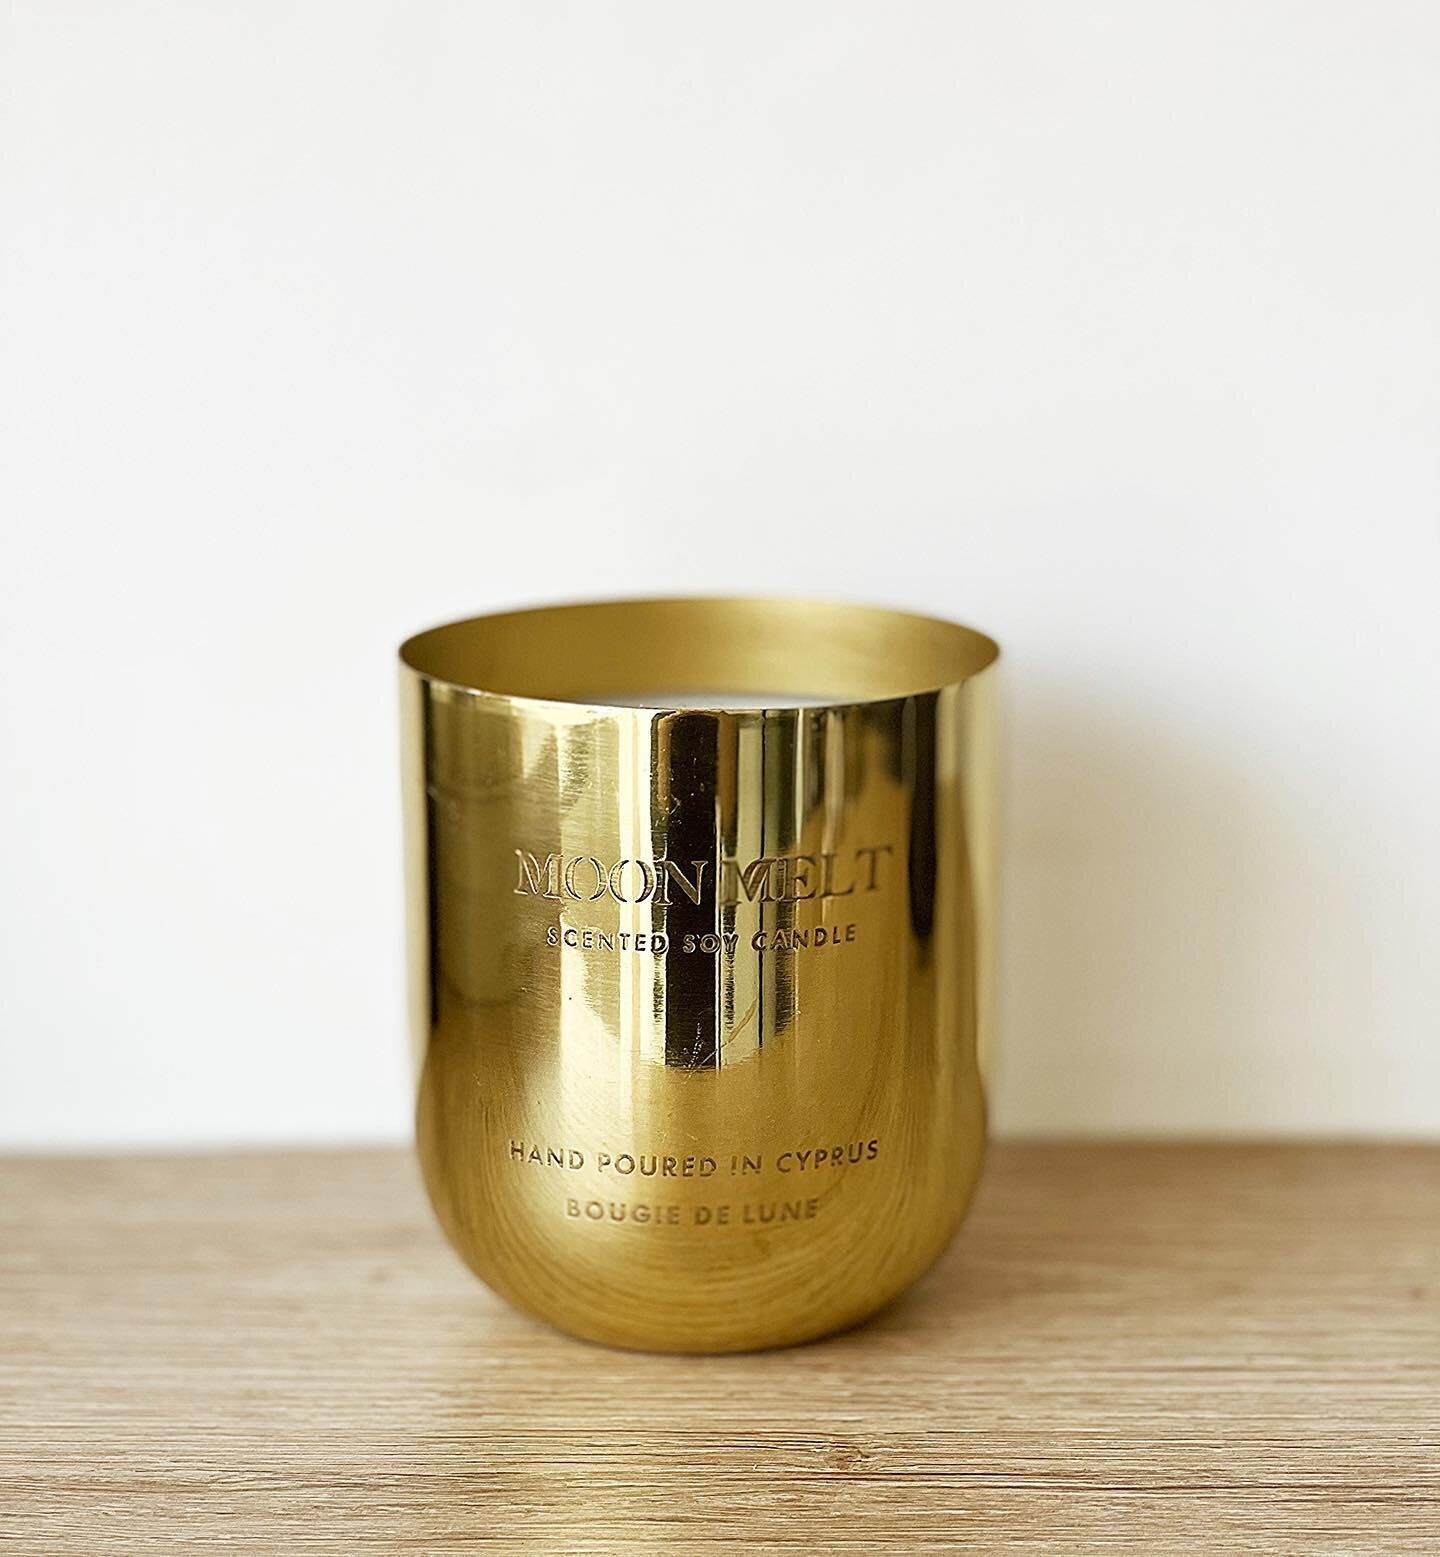 Can we take a moment to appreciate our new addition // a premium engraved metal container in gold finish? ✨

I also wanted to thank everyone for the love and support you&rsquo;ve shown my brand for the past year but also for the encouragement with an